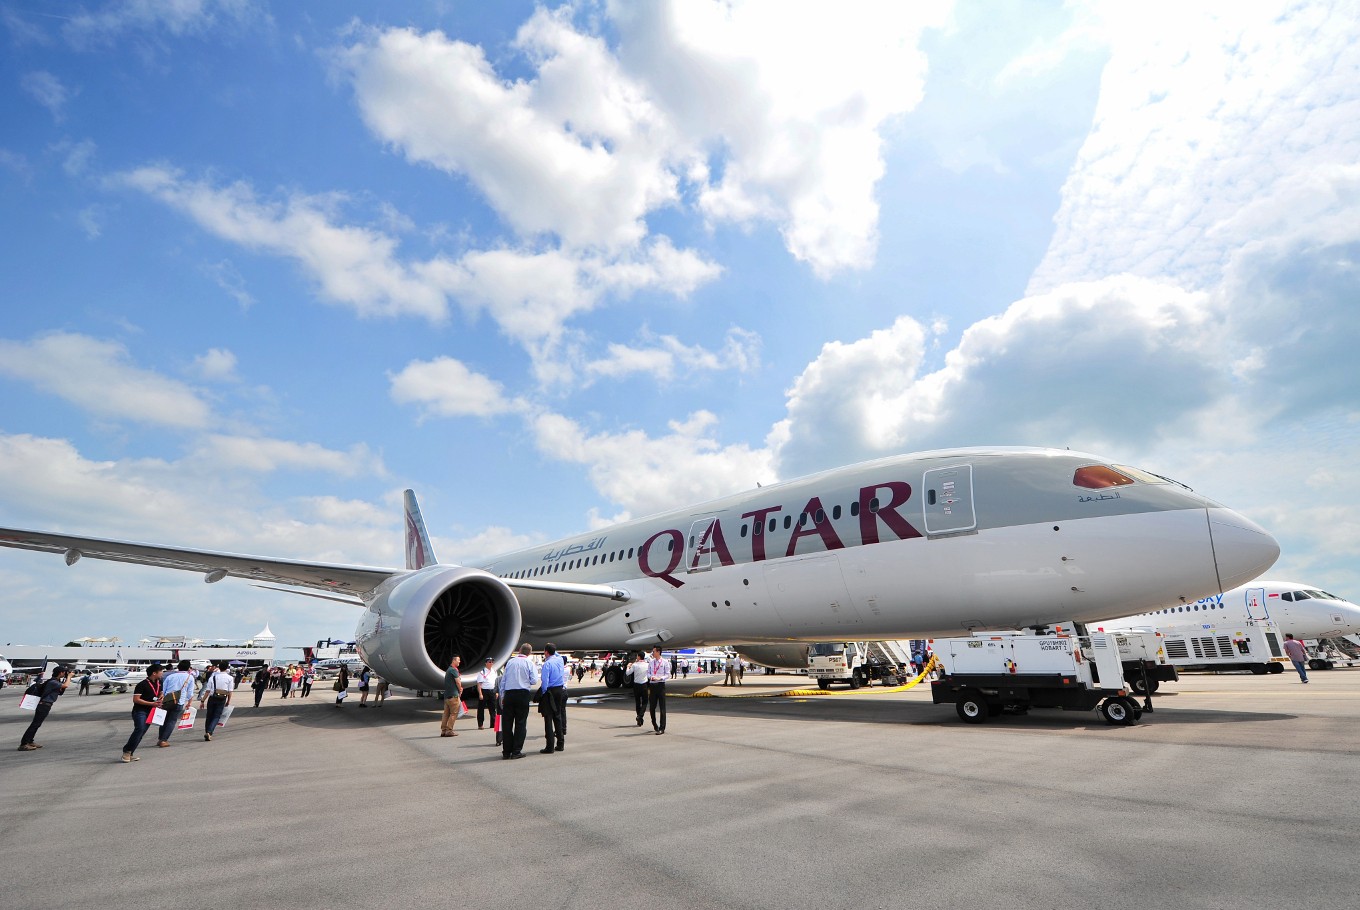 Qatar Airways resumes services to Bali, plans to increase flights to